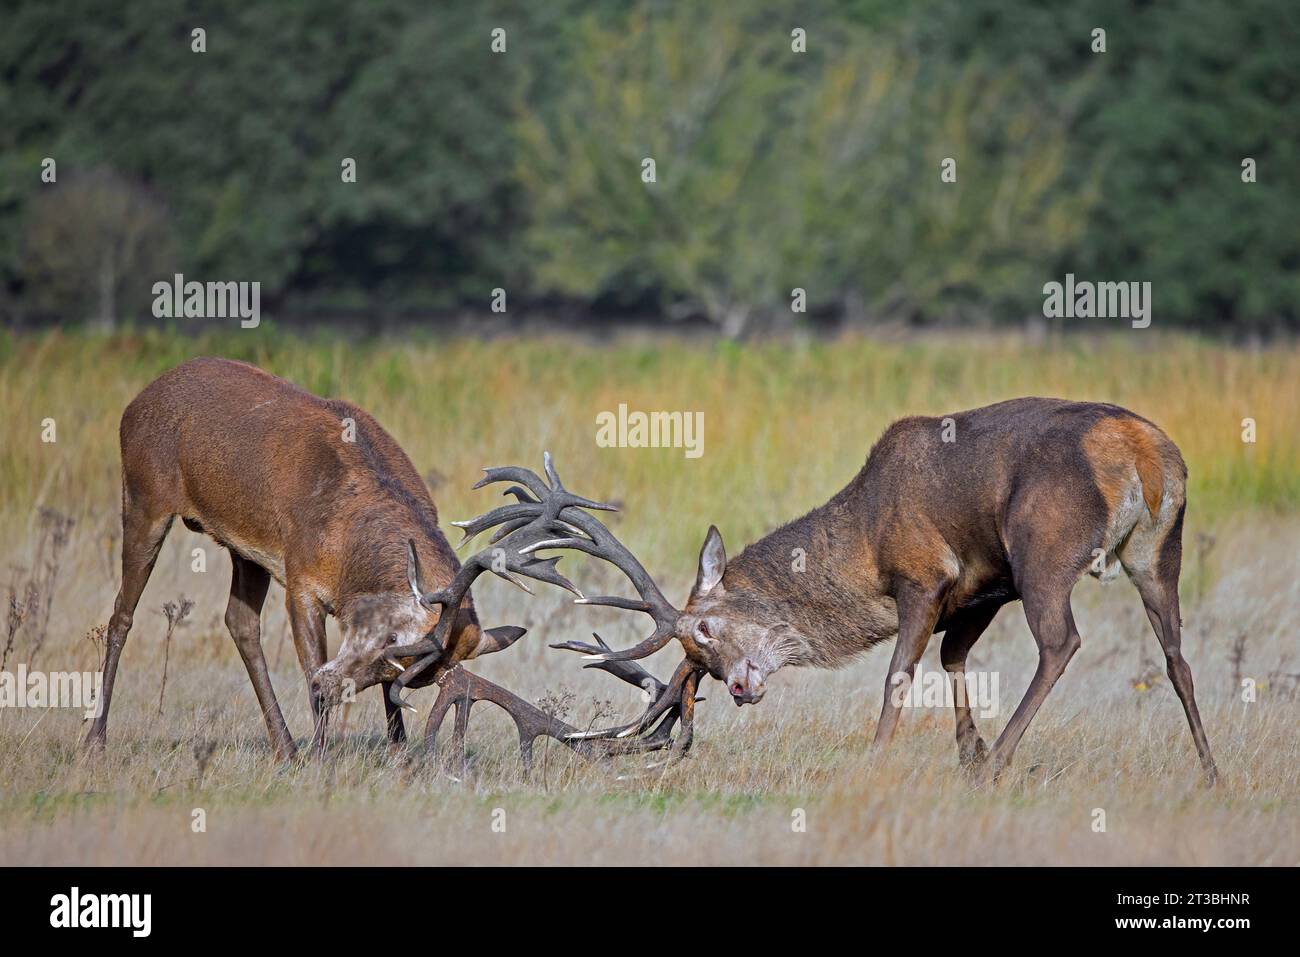 Two rutting red deer (Cervus elaphus) stags fighting by locking antlers during fierce mating battle in grassland at forest edge during rut in autumn Stock Photo